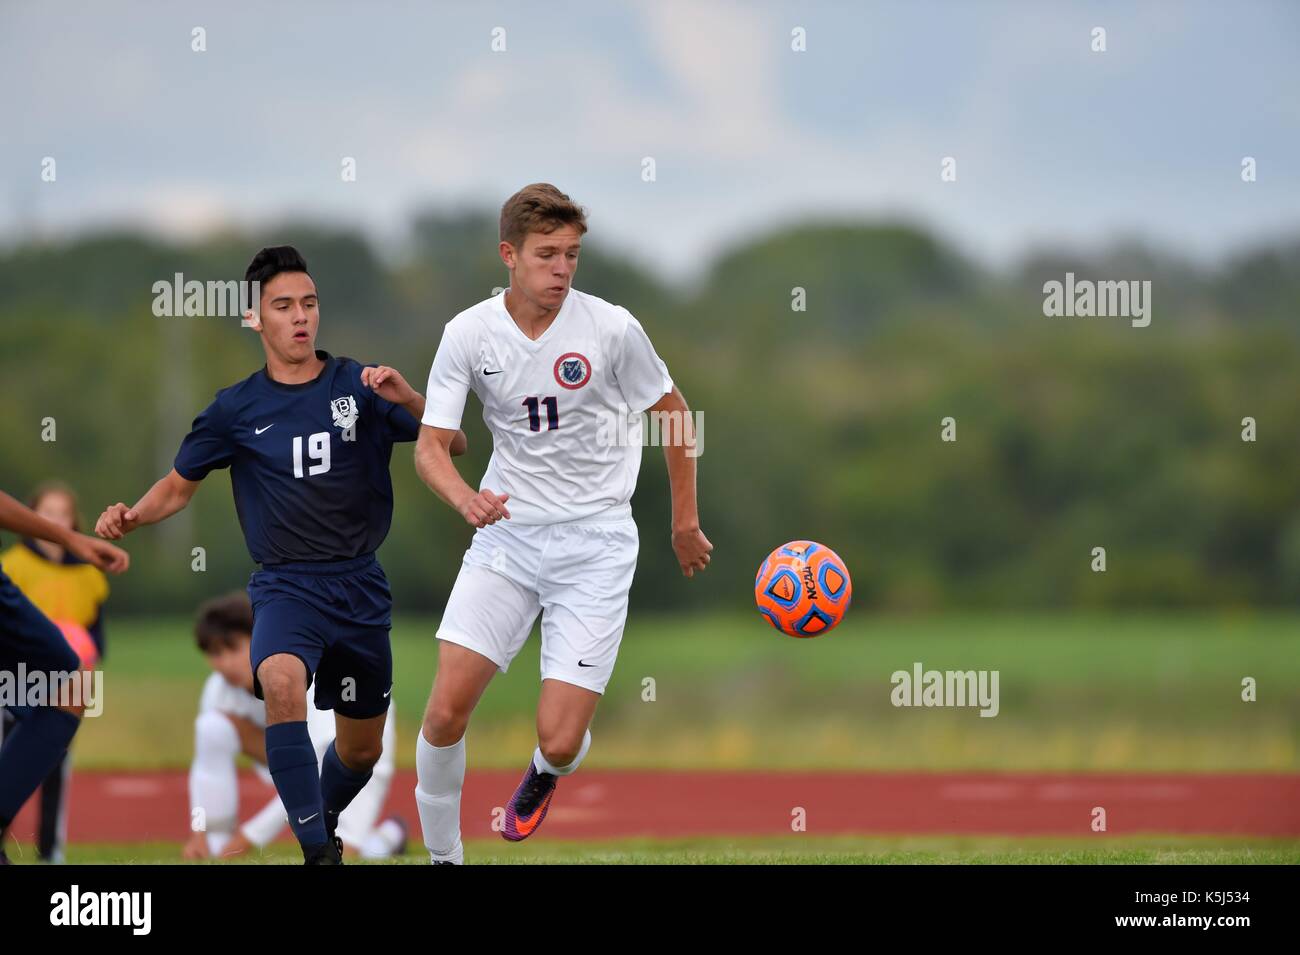 Opposing players pursuing a loose ball during a high school soccer (football) match. USA. Stock Photo